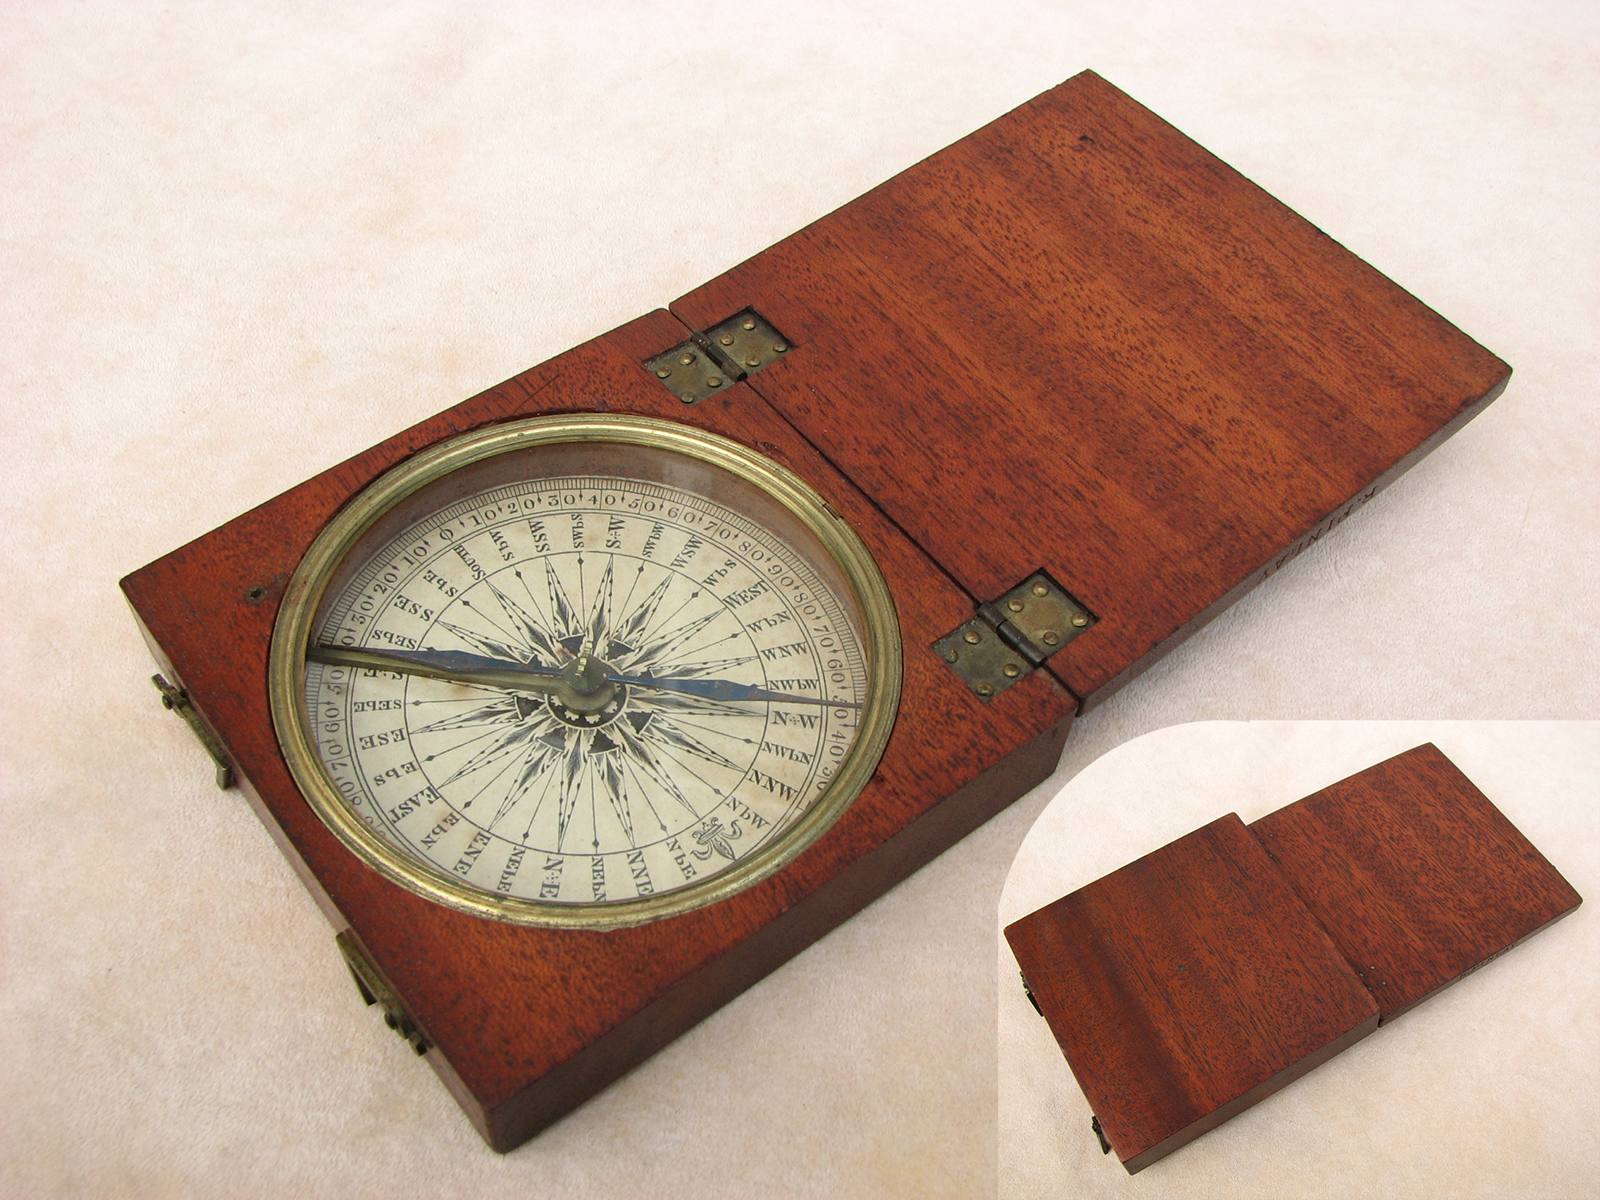 Georgian period travellers mahogany cased pocket compass, R. Finlay